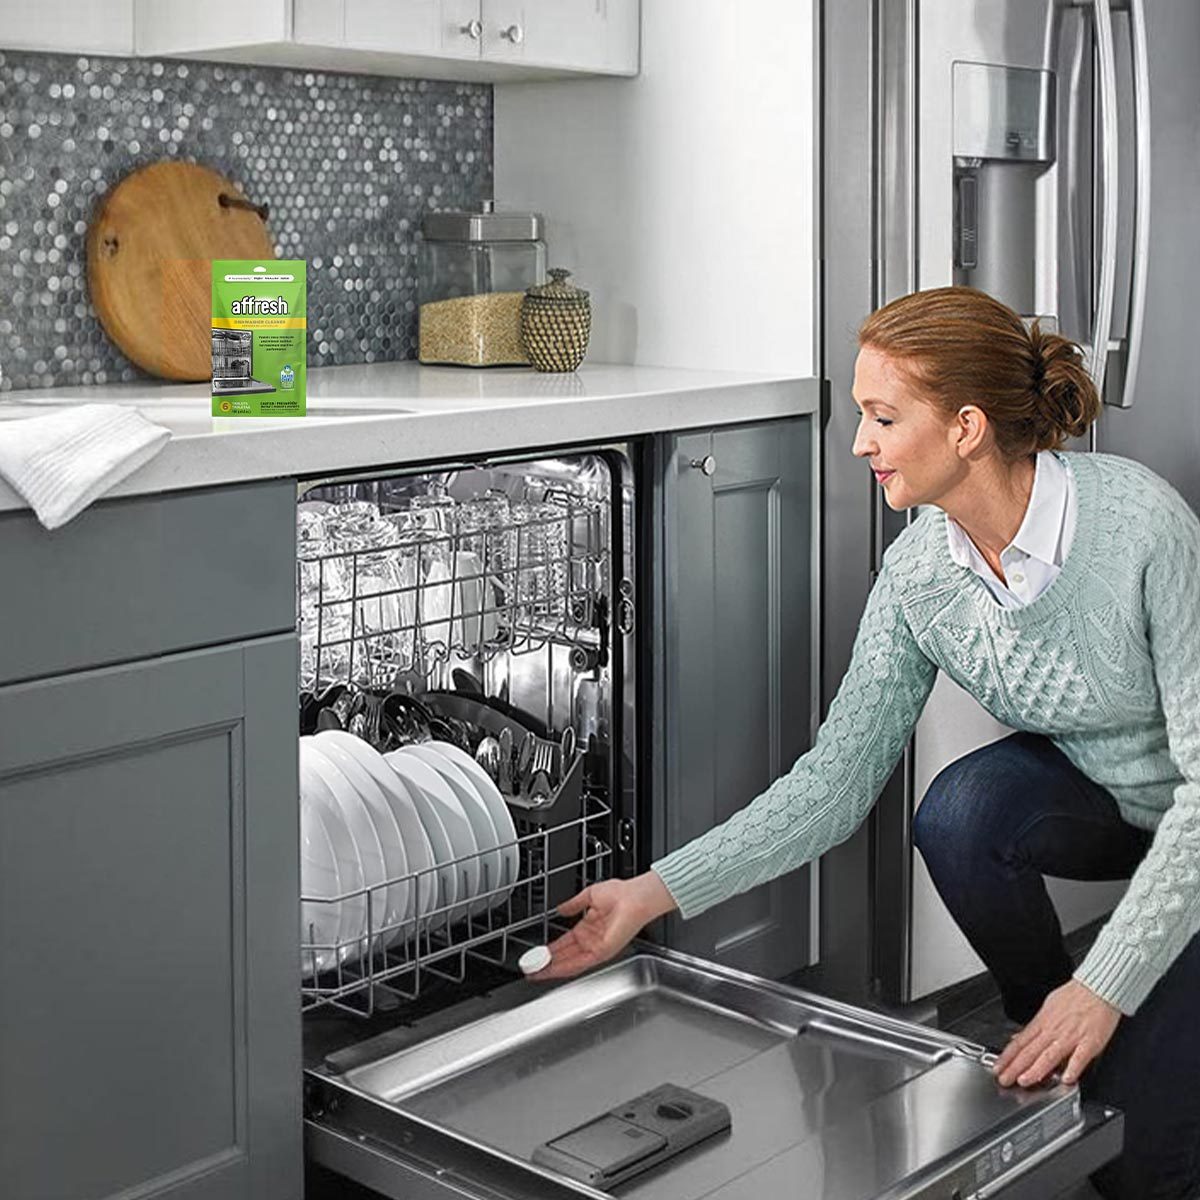 https://www.tasteofhome.com/wp-content/uploads/2023/01/This-9-Cleaner-Is-the-Secret-to-Making-Your-Dishwasher-Sparkle_FT_via-amazon.com_.jpg